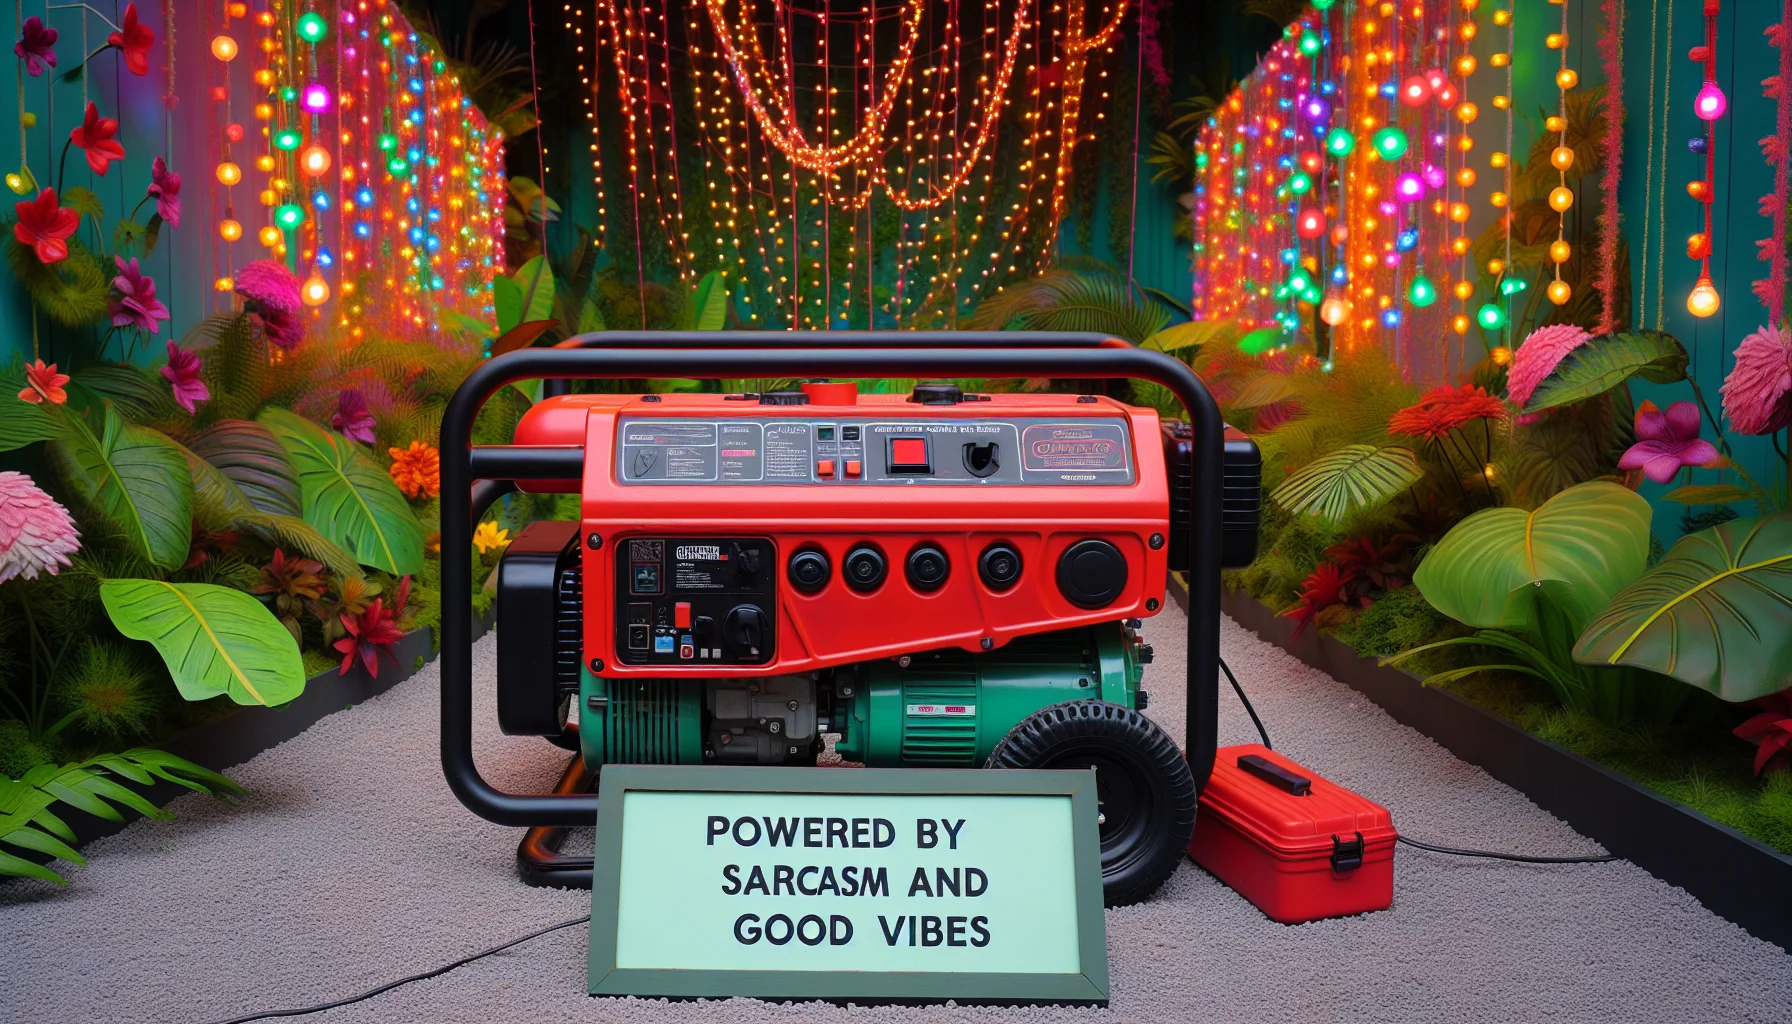 Visualize a portable generator similar to the aesthetics of a model created in 3500, nestled within an amusing scenario to encourage people to generate their own electricity. This generator is robust and colored in bright red, with black contoured lines and a sturdy handle on top. Sitting cheekily in a vivid, lush outdoor setting, an array of multi-hued party lights are draped carelessly around it, illuminating a sign next to it that playfully declares 'Powered by Sarcasm and Good Vibes'. The theme is meant to be light-hearted, emphasizing the importance and ease of self-sufficient energy production in a fun, engaging manner.